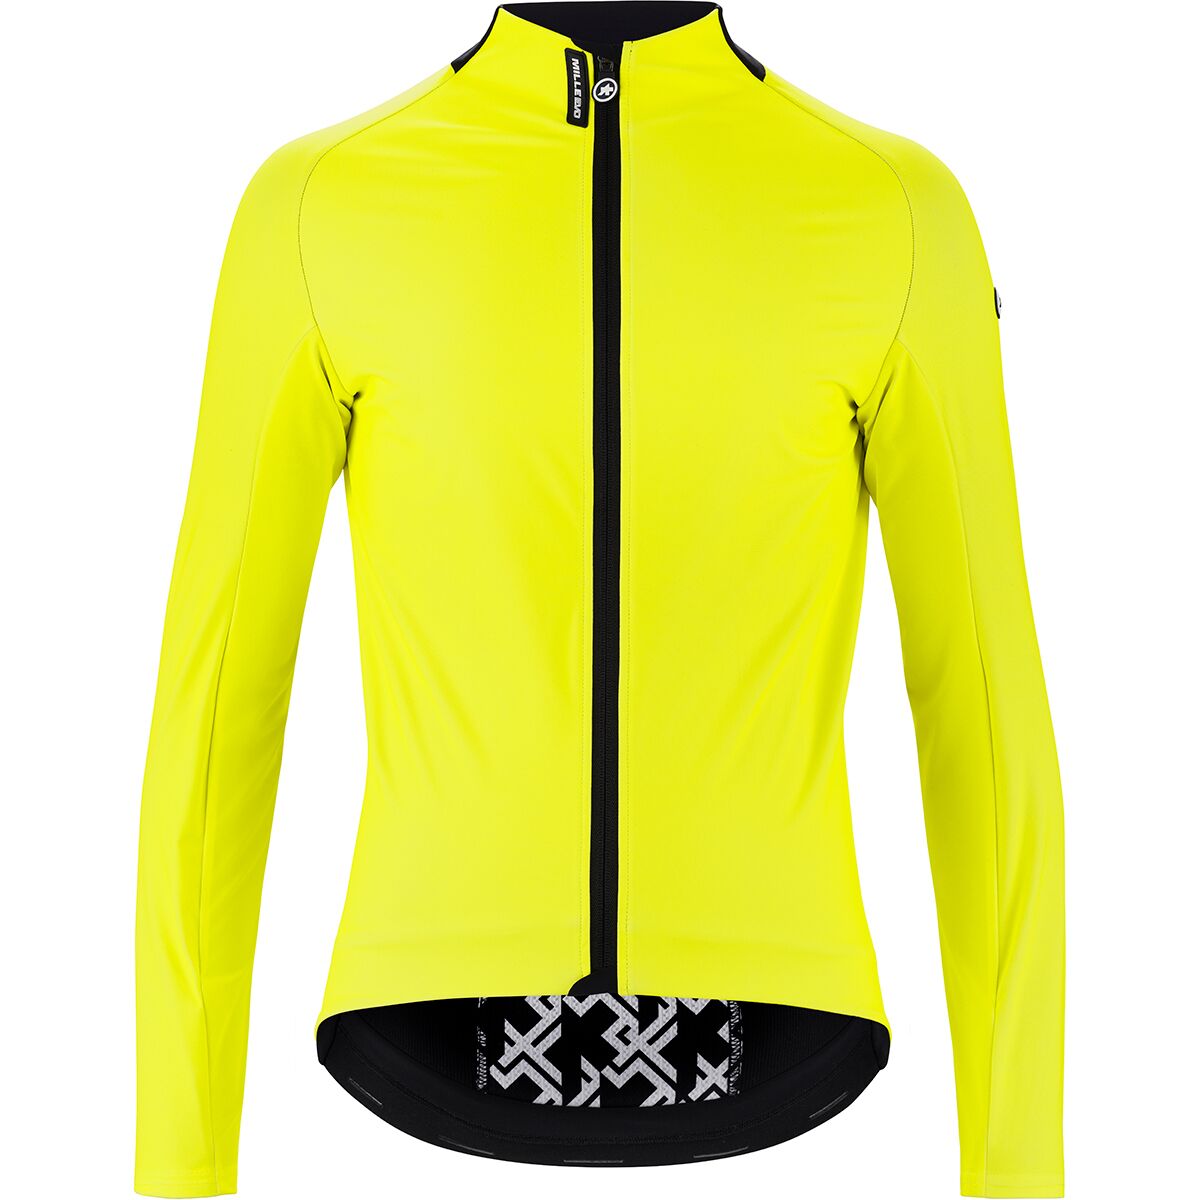 Best winter cycling clothing (video)